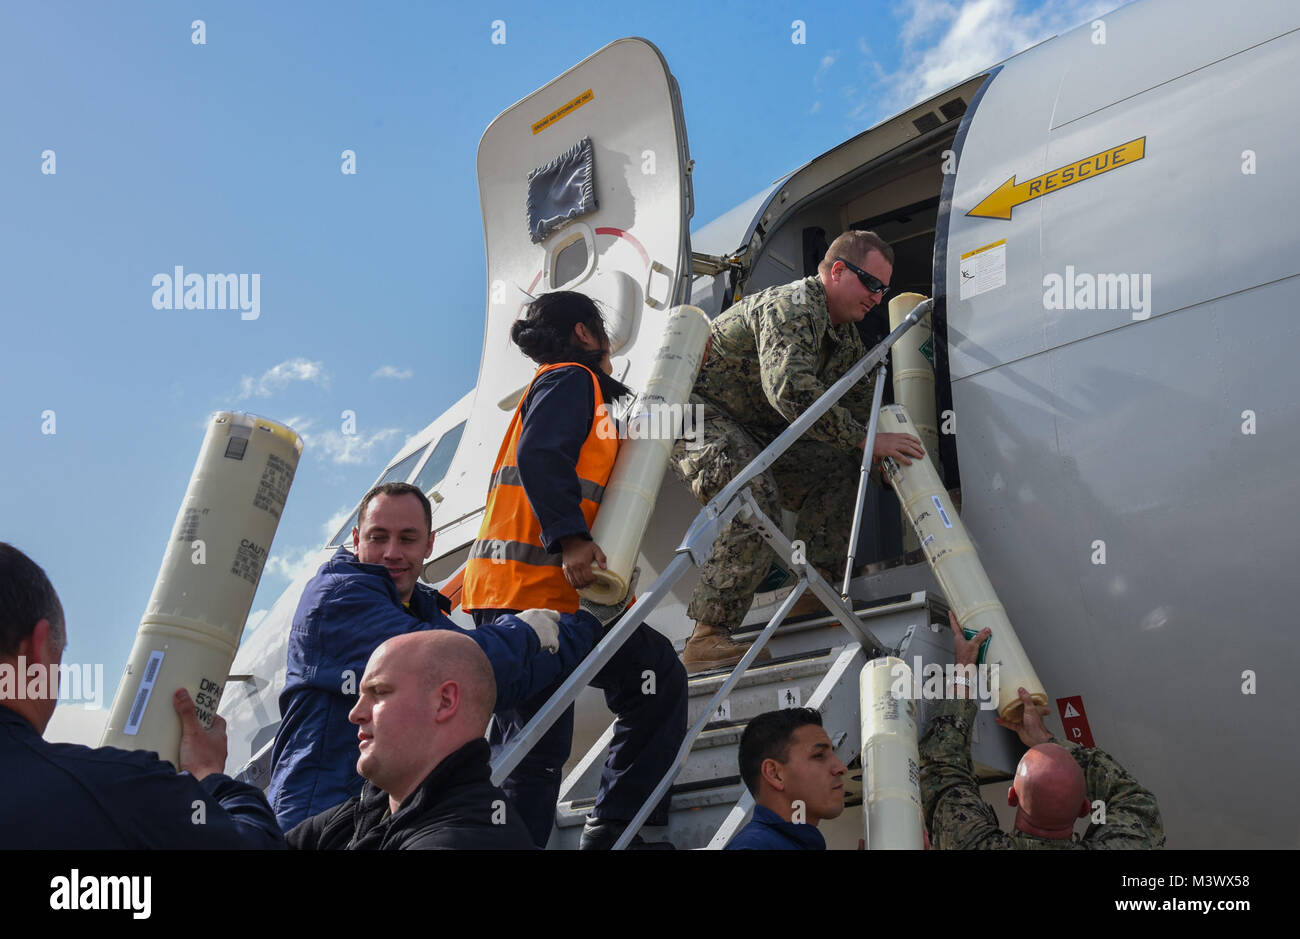 171124-N-IT277-039  Bahia Blanca, ARGENTINA (Nov. 23, 2017) Members of the Argentine Navy help Sailors from the ‘Mad Foxes’ of Patrol Squadron (VP) 5 and the ‘Pelicans’ of VP-45 load sonobouys onto a P8-A Poseidon aircraft.  Sailors from VP-5 and VP-45 are currently in Bahia Blanca as part of a detachment from Commander, Patrol and Reconnaissance Wing (CPRW) 11 assisting the Argentine military in their search for the missing Argentine submarine ARA San Juan.  (U.S. Navy photo by Mass Communications Specialist 2nd Class Sean R. Morton/Released) 171124-N-IT277-039 by ussouthcom Stock Photo